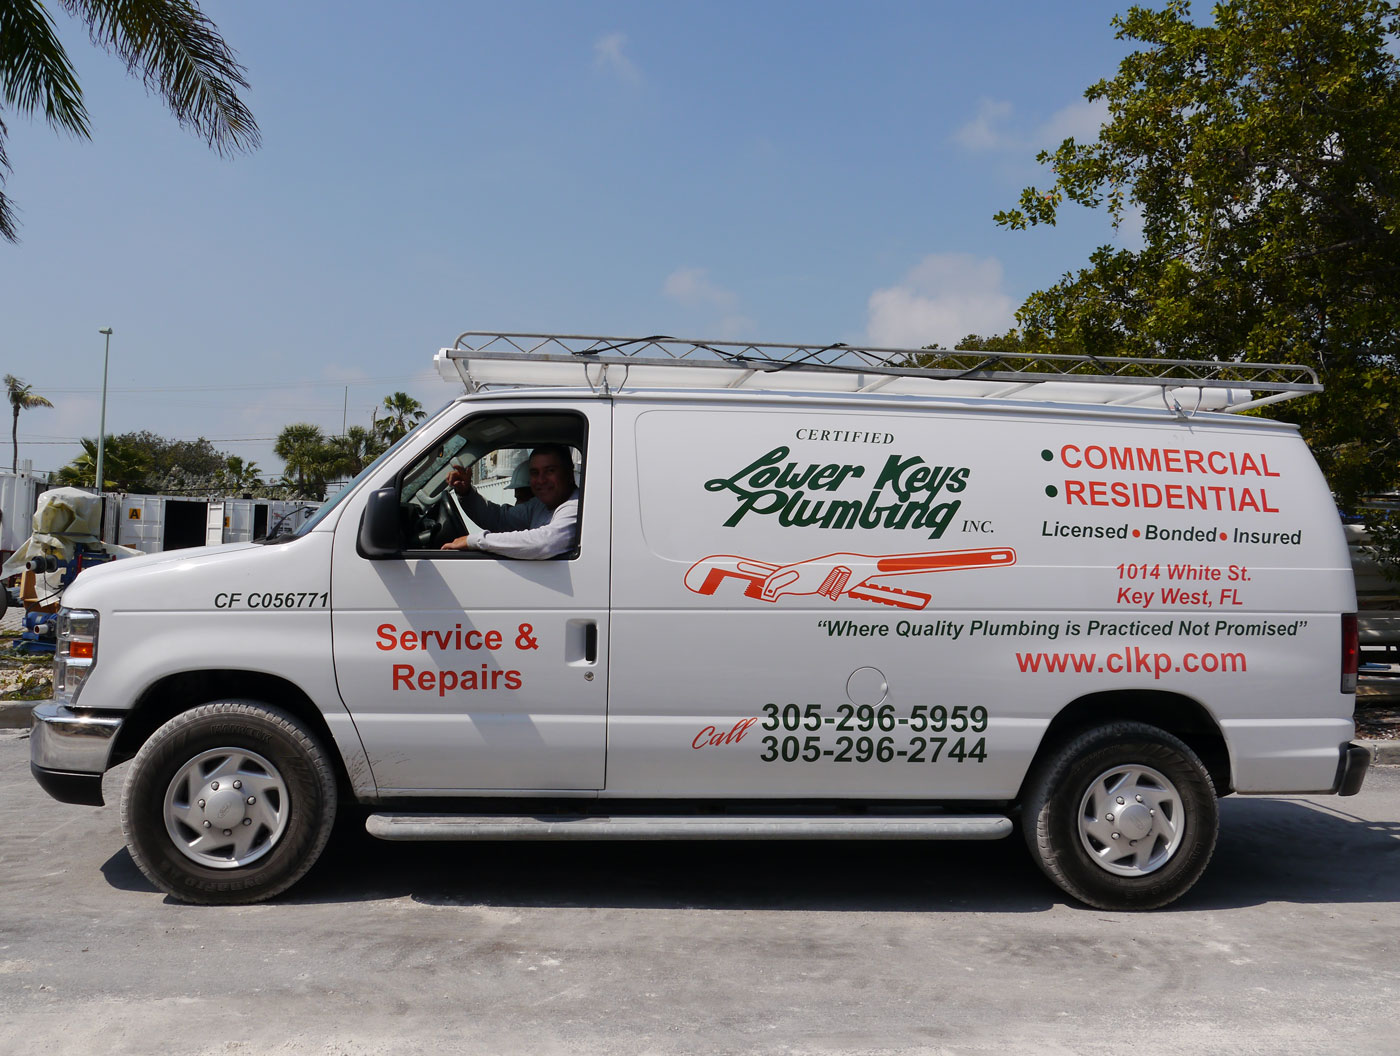 photo of the lower keys plumbing van, which take care of repair and emergency plumbing services in the lower florida keys and Key West Florida 